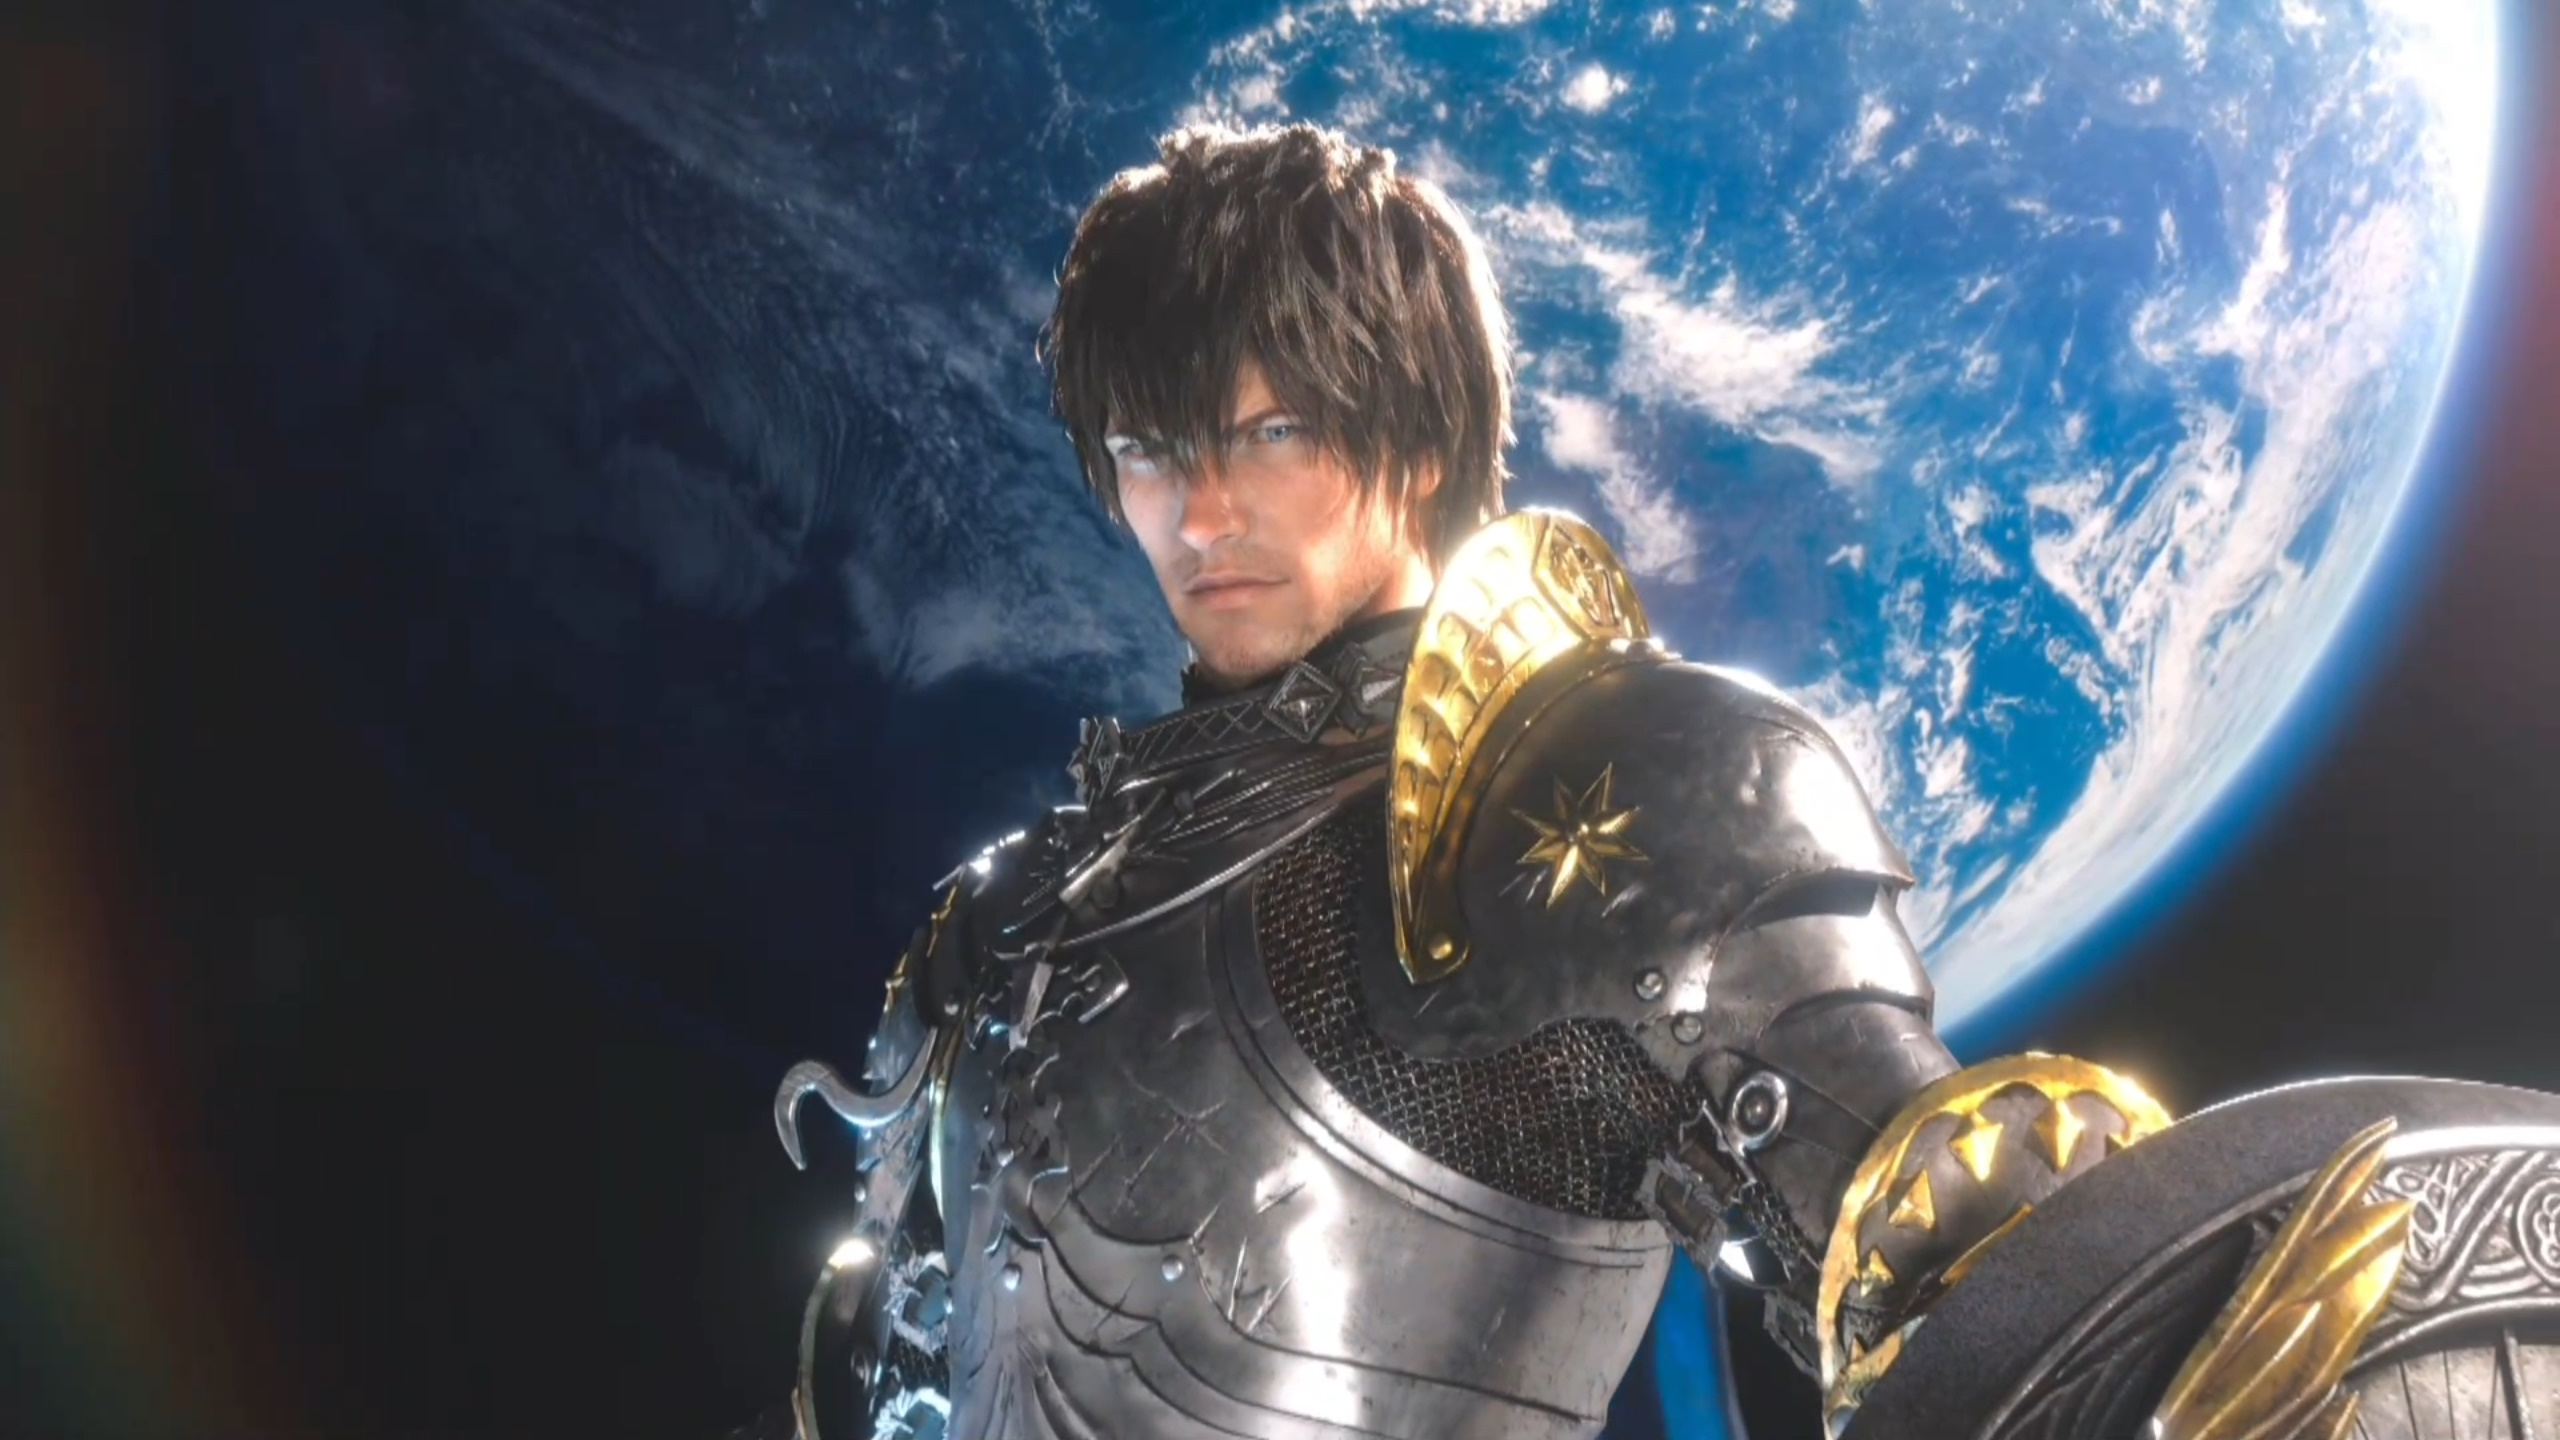  Final Fantasy 14: Endwalker is coming November 23, check out the new 6-minute trailer 